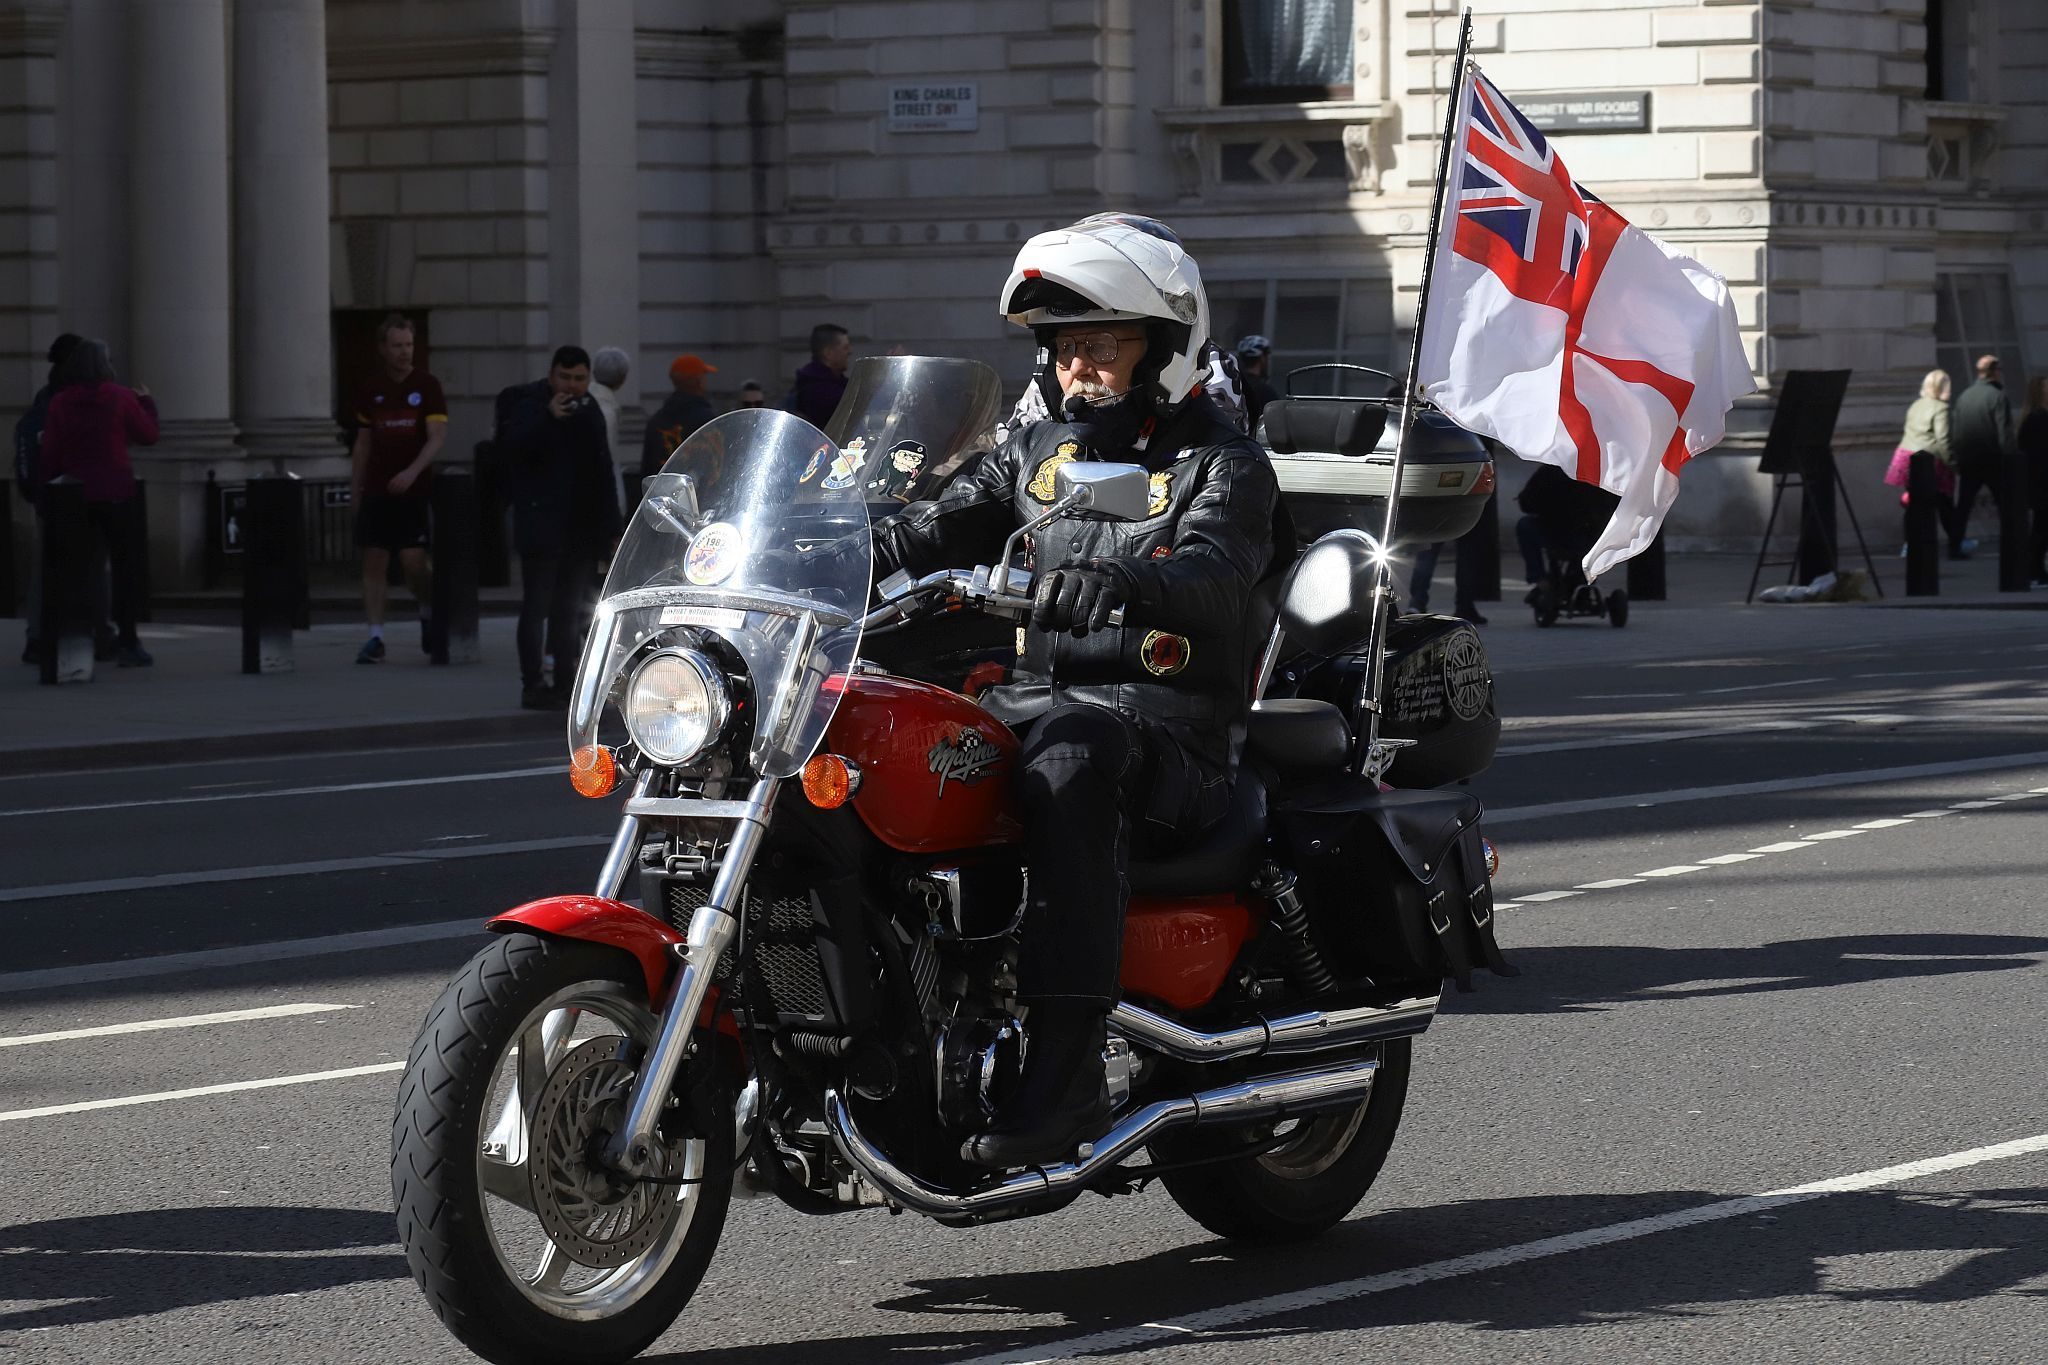 The Rolling Thunder UK military veterans motorcycle Ride of Respect, in memory of the late HM Queen Elizabeth II. 7th April 2023, Good Friday. Photographed in Whitehall, Westminster, London passing The Cenotaph war memorial and 10 Downing Street. Armed forces veterans. Royal Navy White Ensign flag.